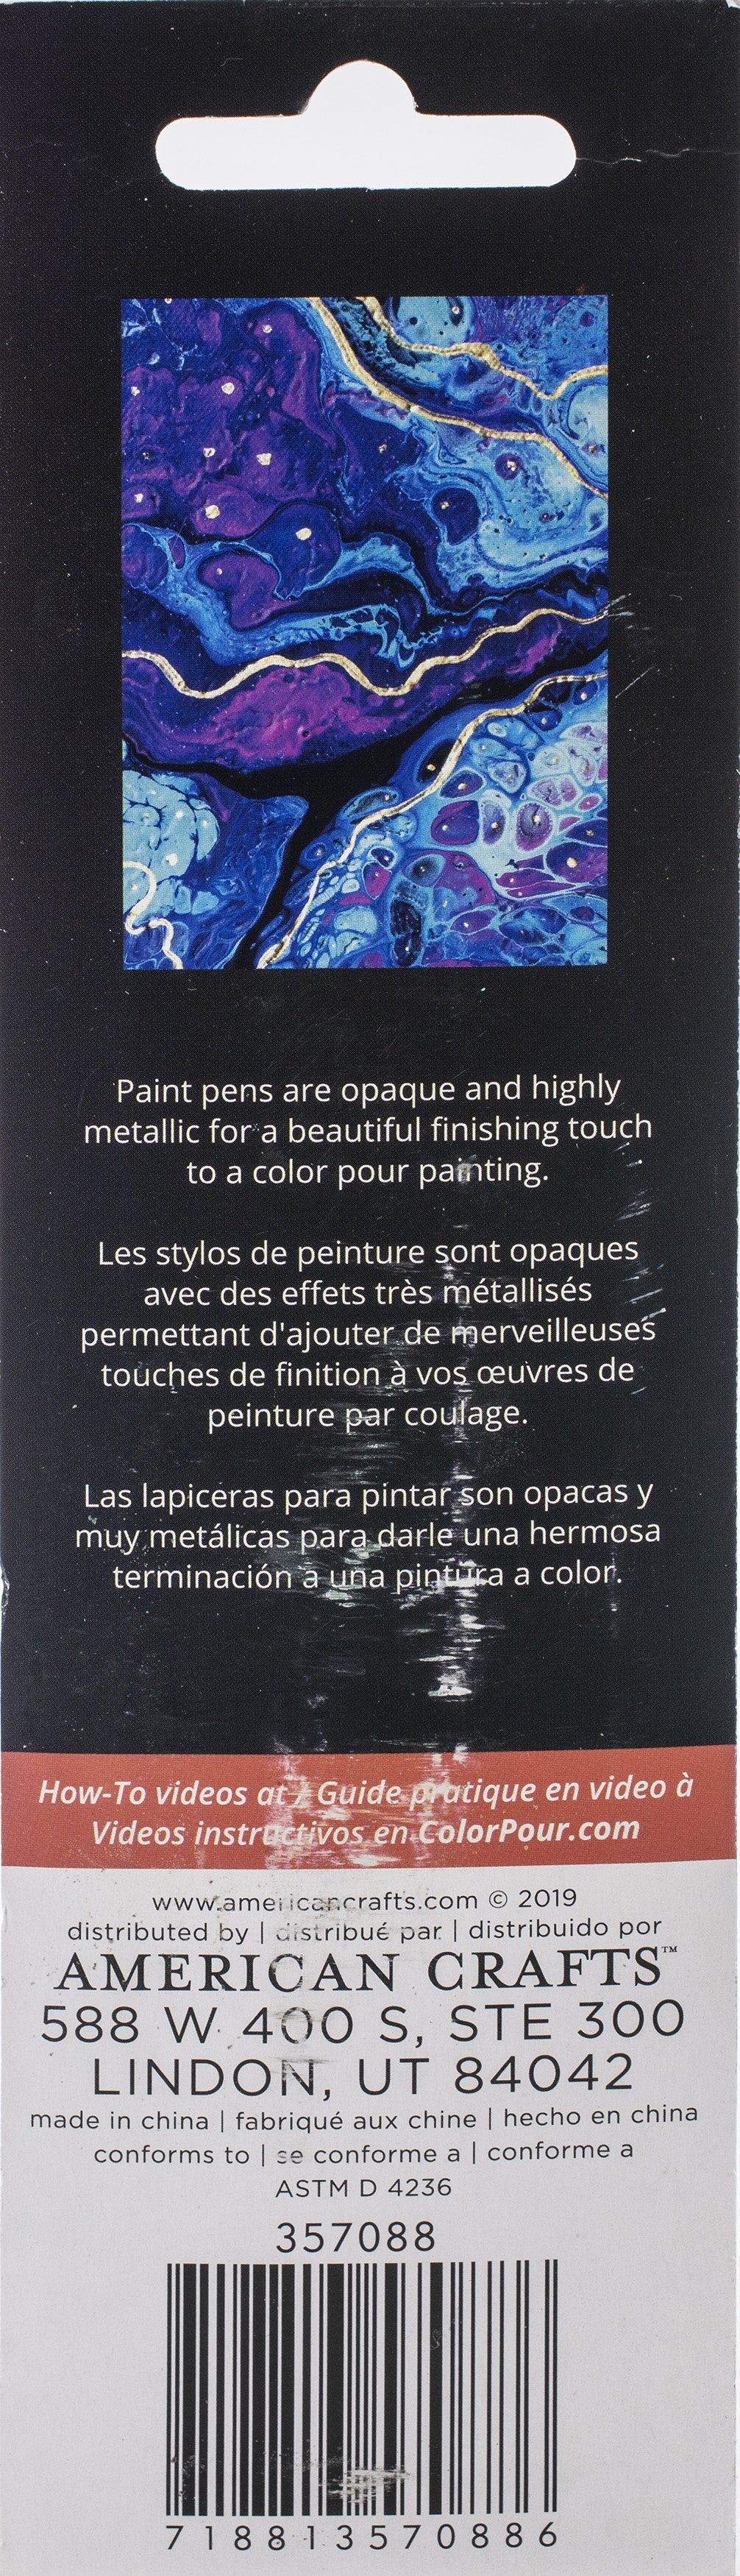 Tattoo Pens - Aka Magical Water Painting Pen - HubPages